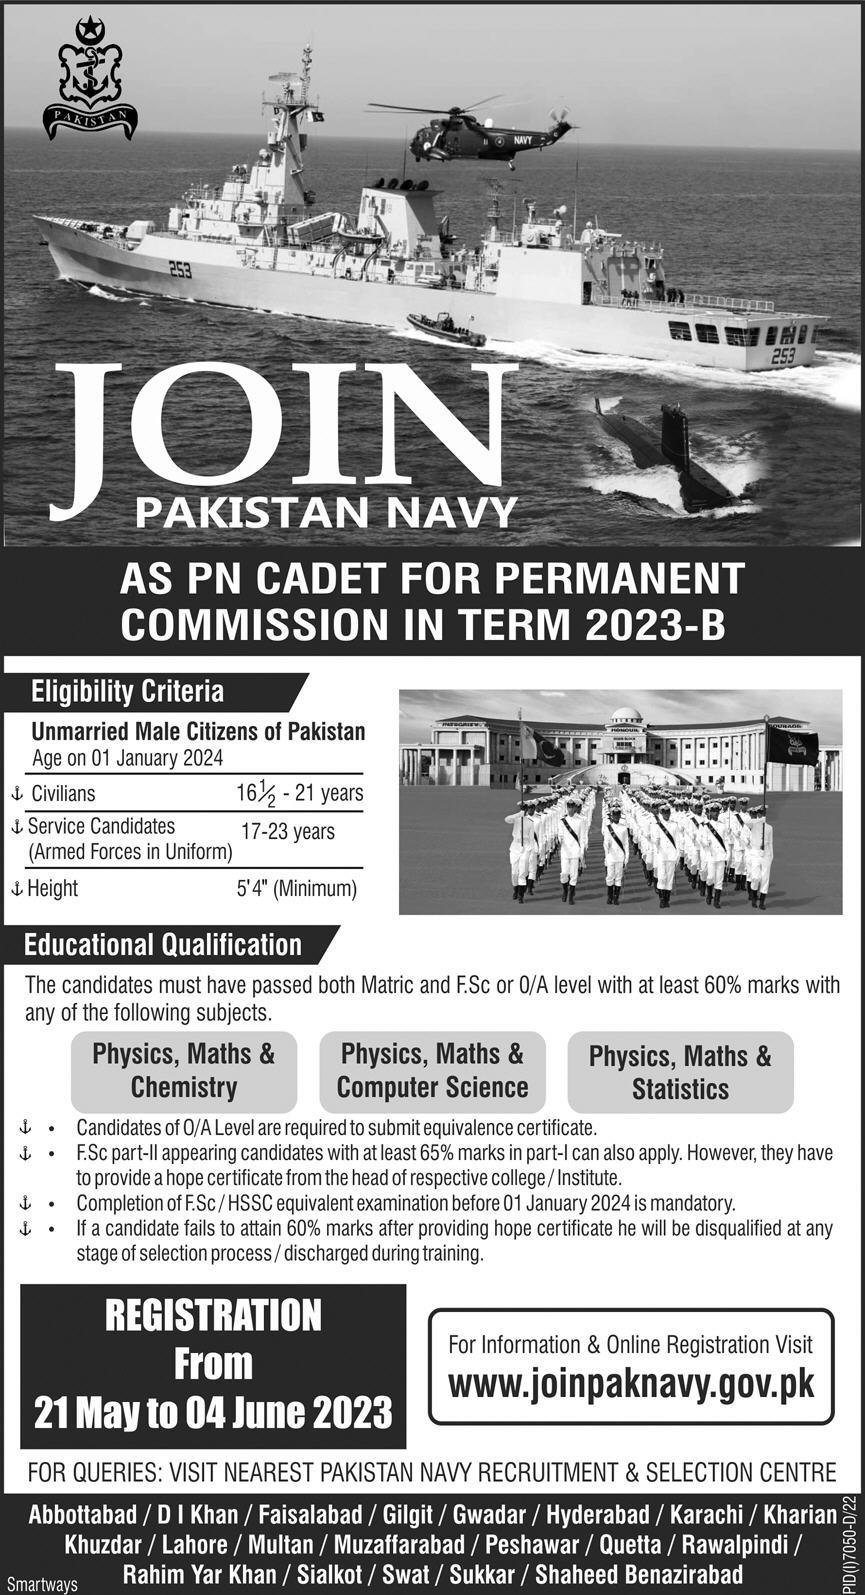 Online Registration to Join Pakistan Navy as PN Cadet 2023-B